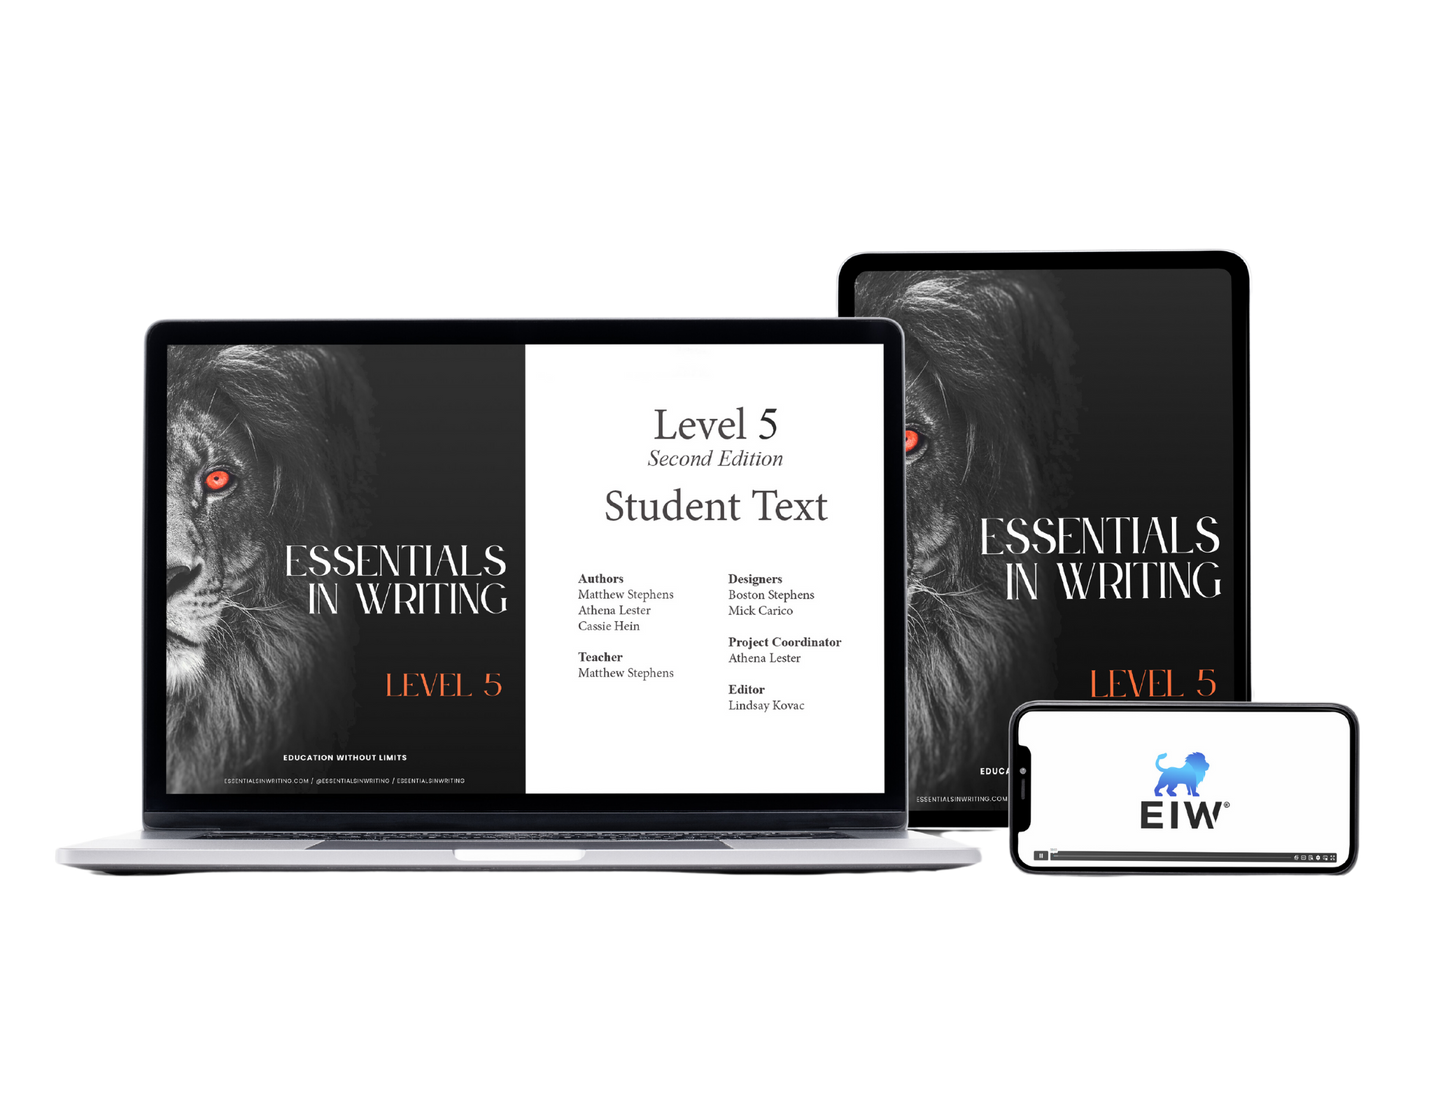 Essentials in Writing Level 5 Second Edition